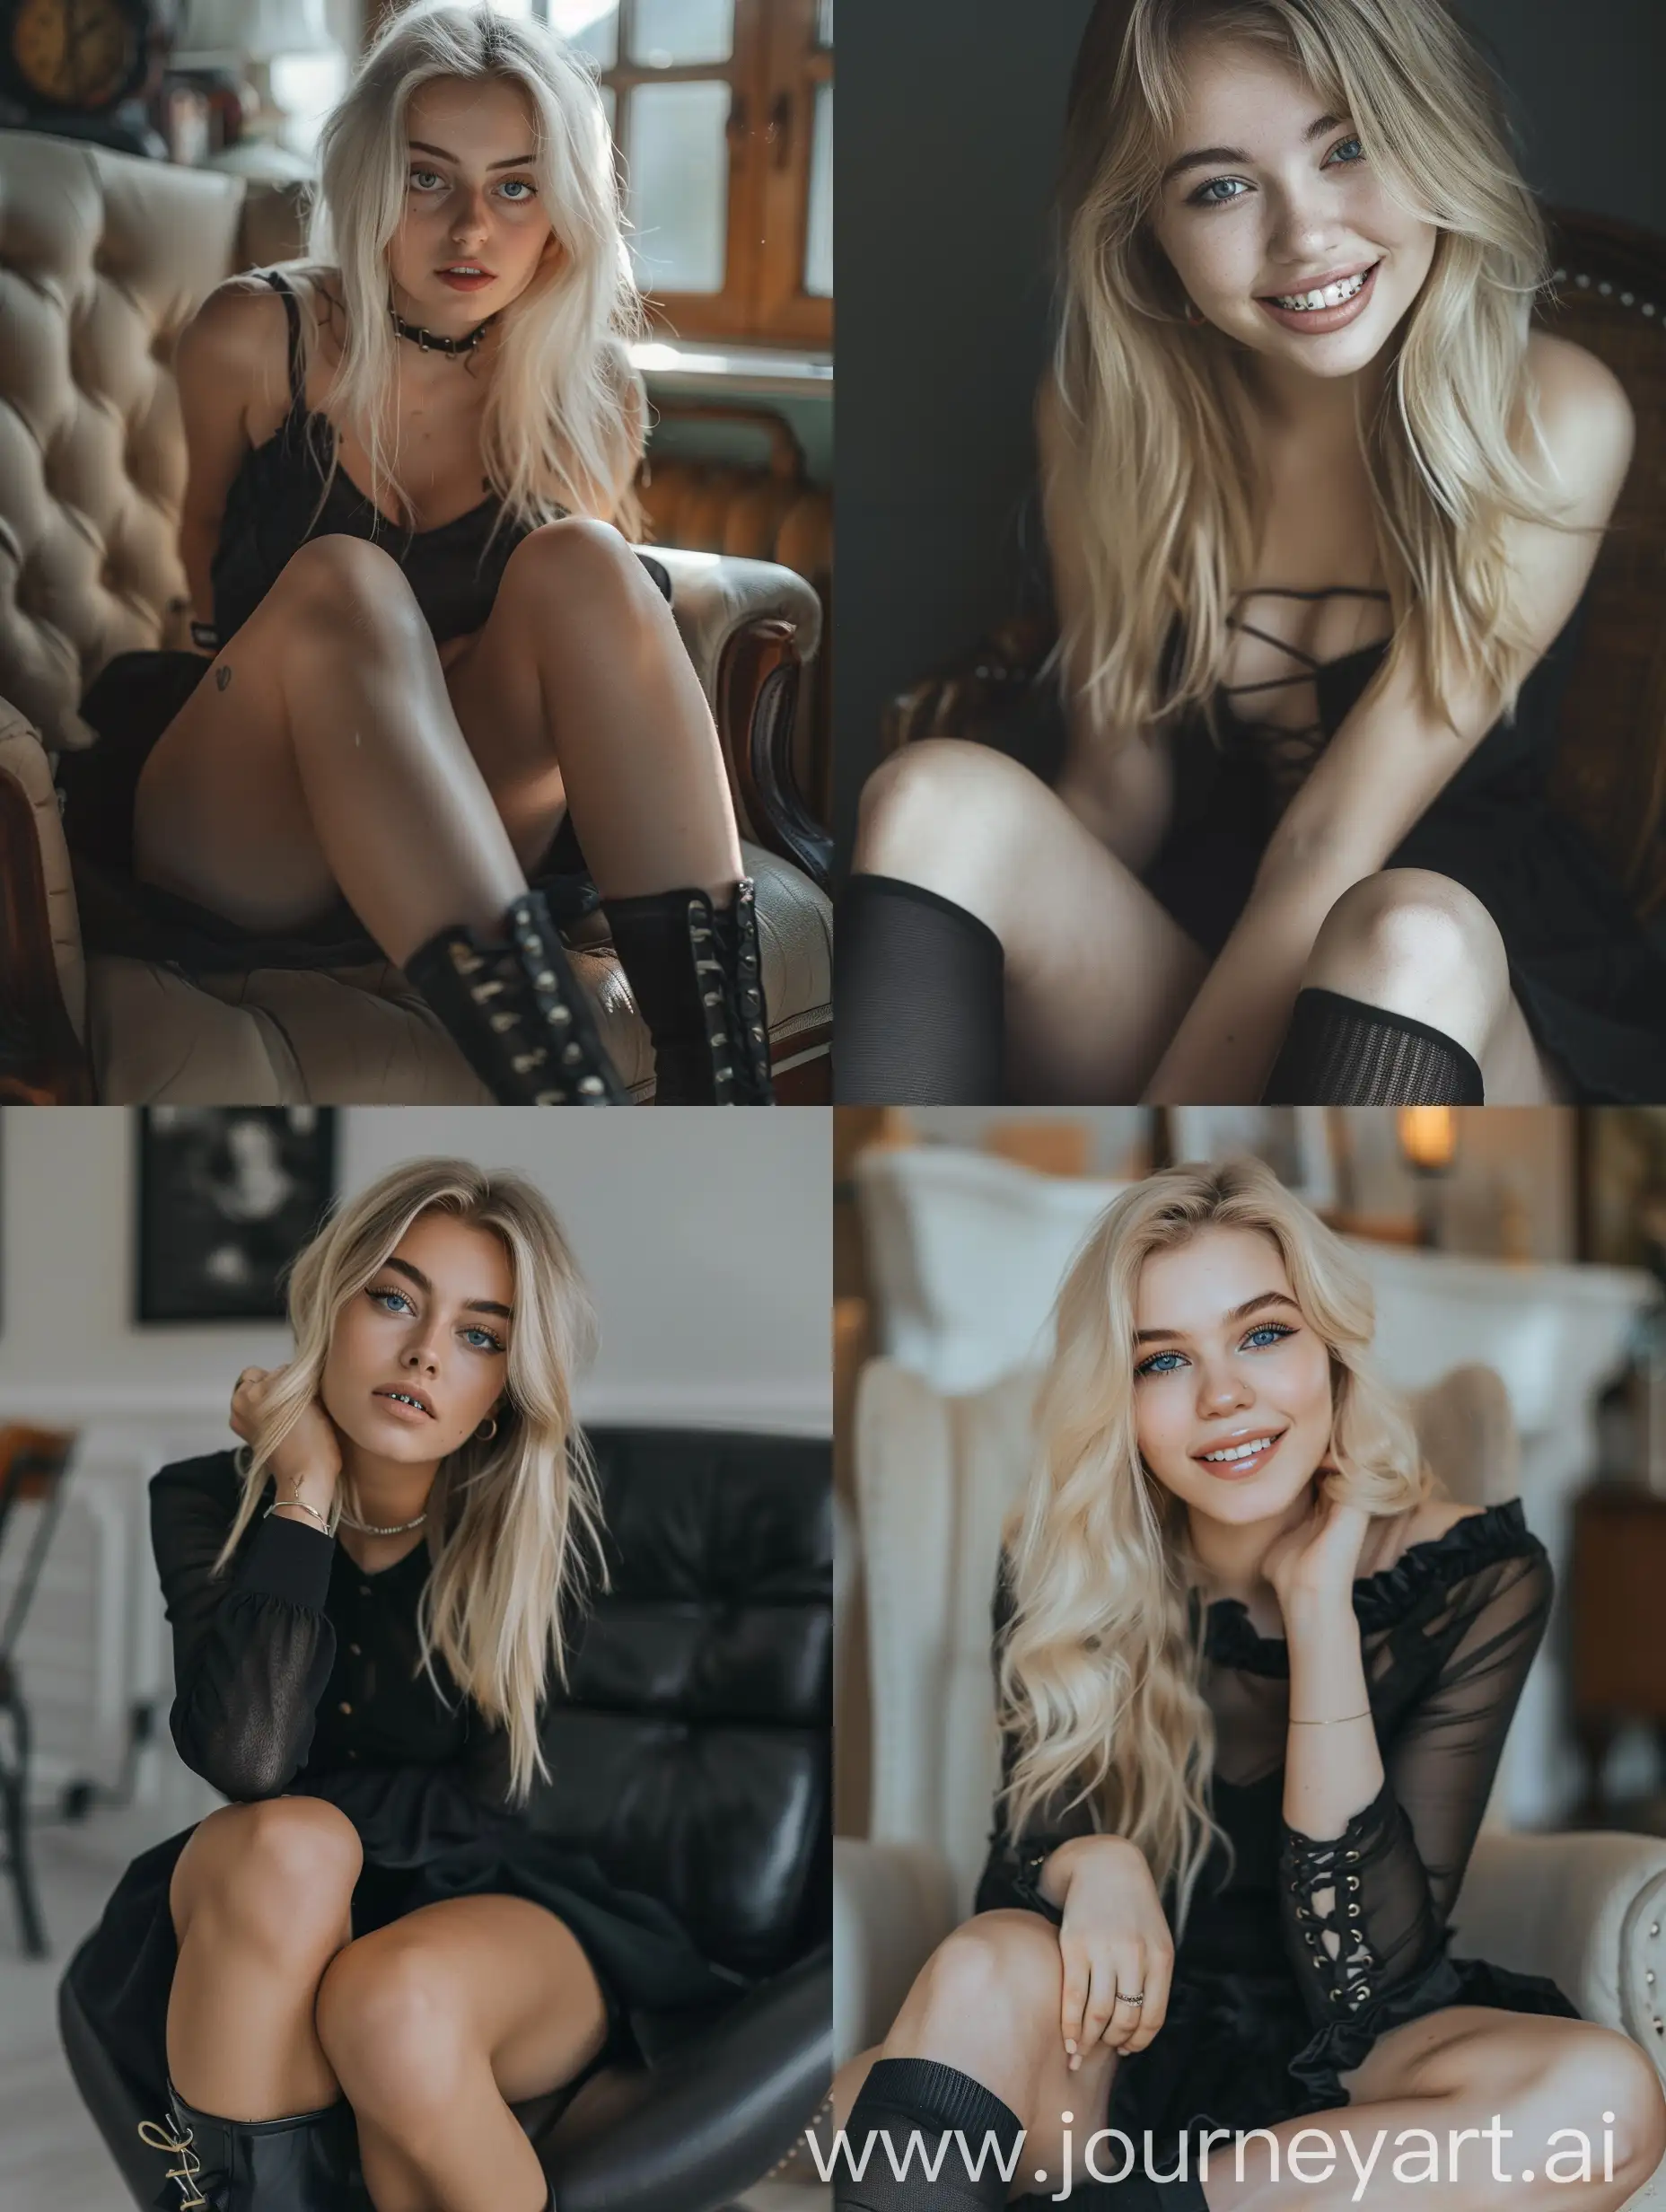 Young-Blonde-Woman-Influencer-in-Black-Dress-and-Boots-Smiling-CloseUp